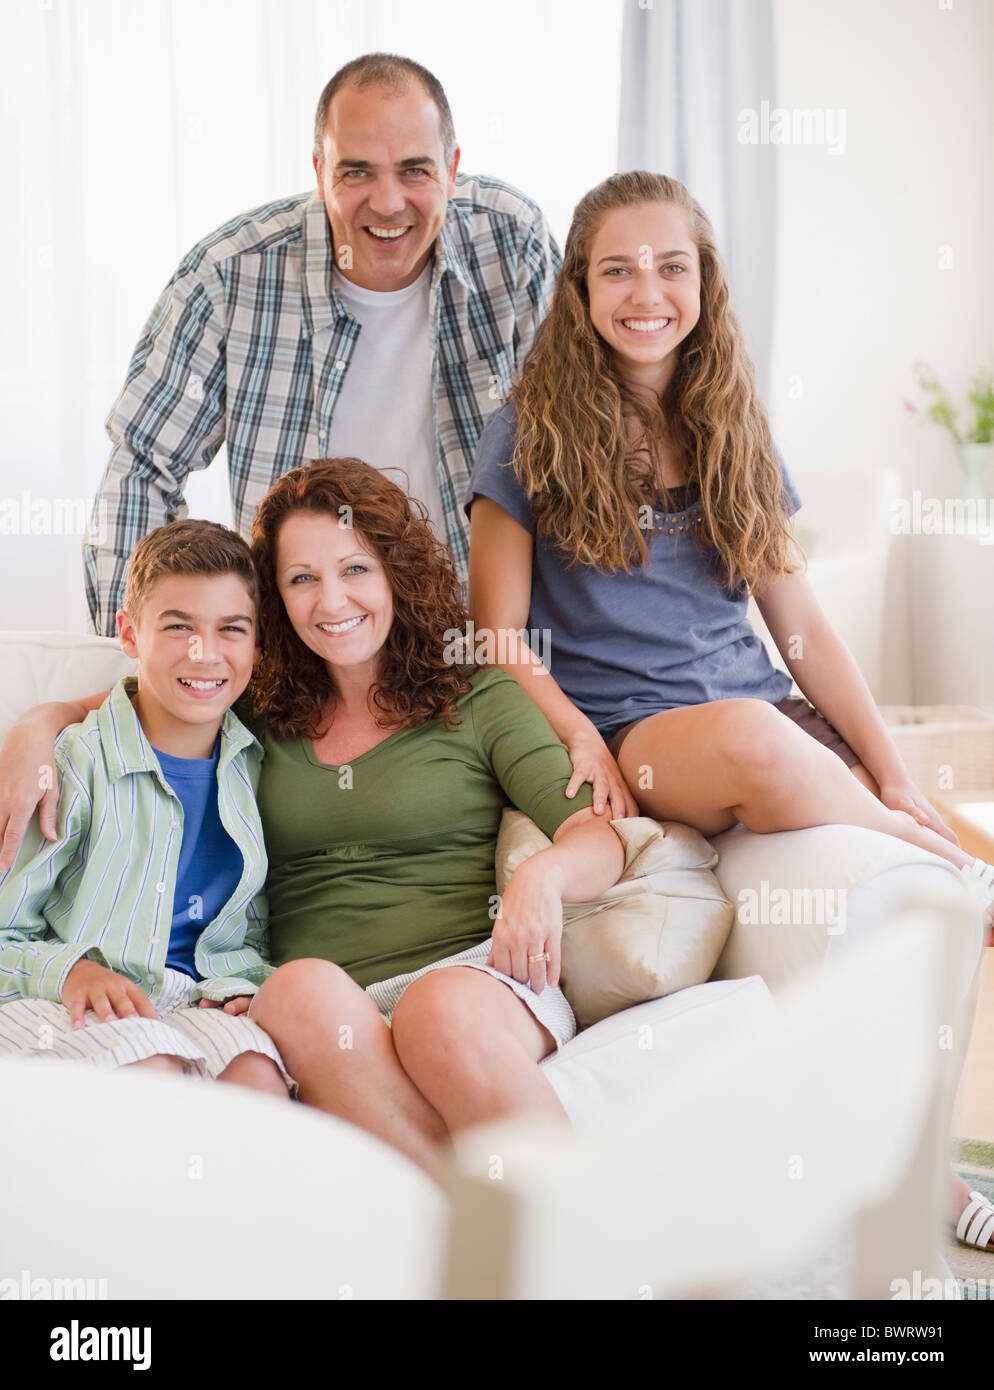 Smiling Hispanic family sitting on sofa together Banque D'Images